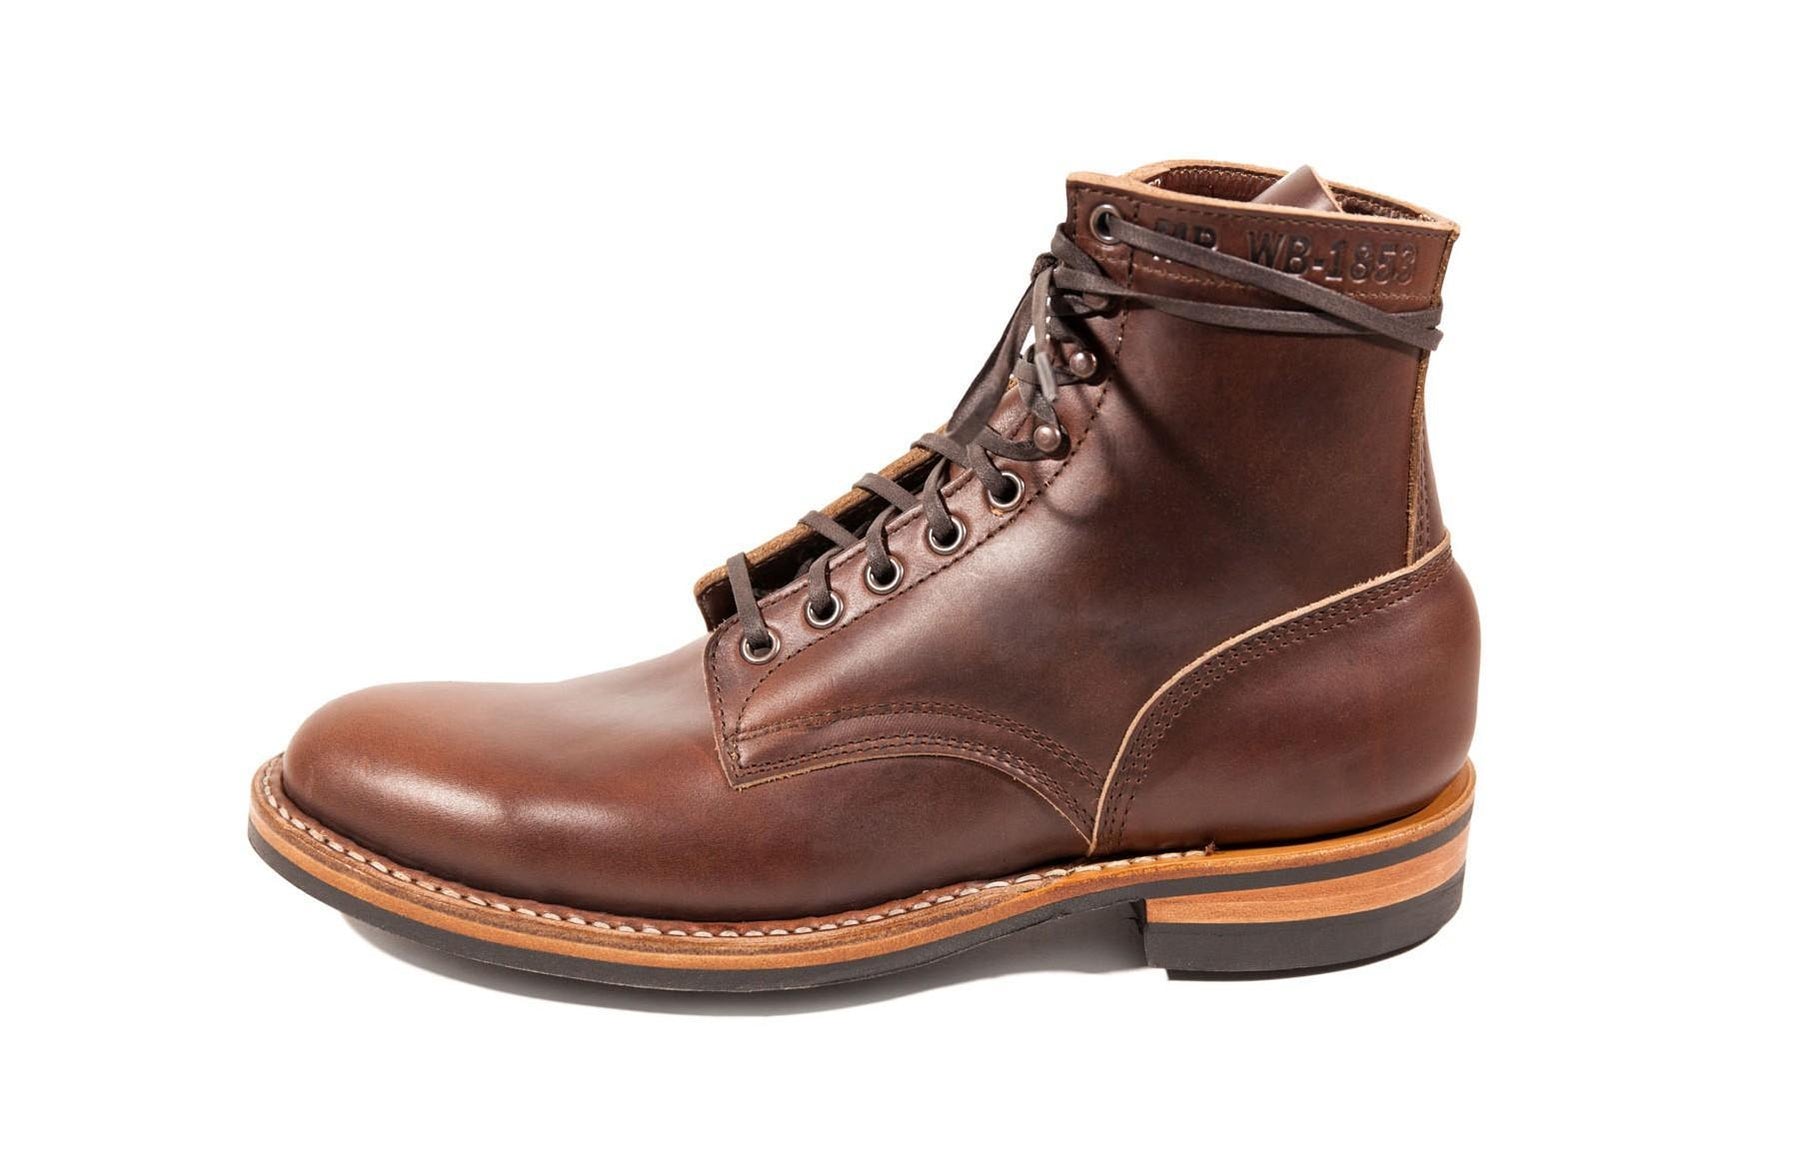 Standard Mp-Sherman (Dainite Sole) by White's Boots